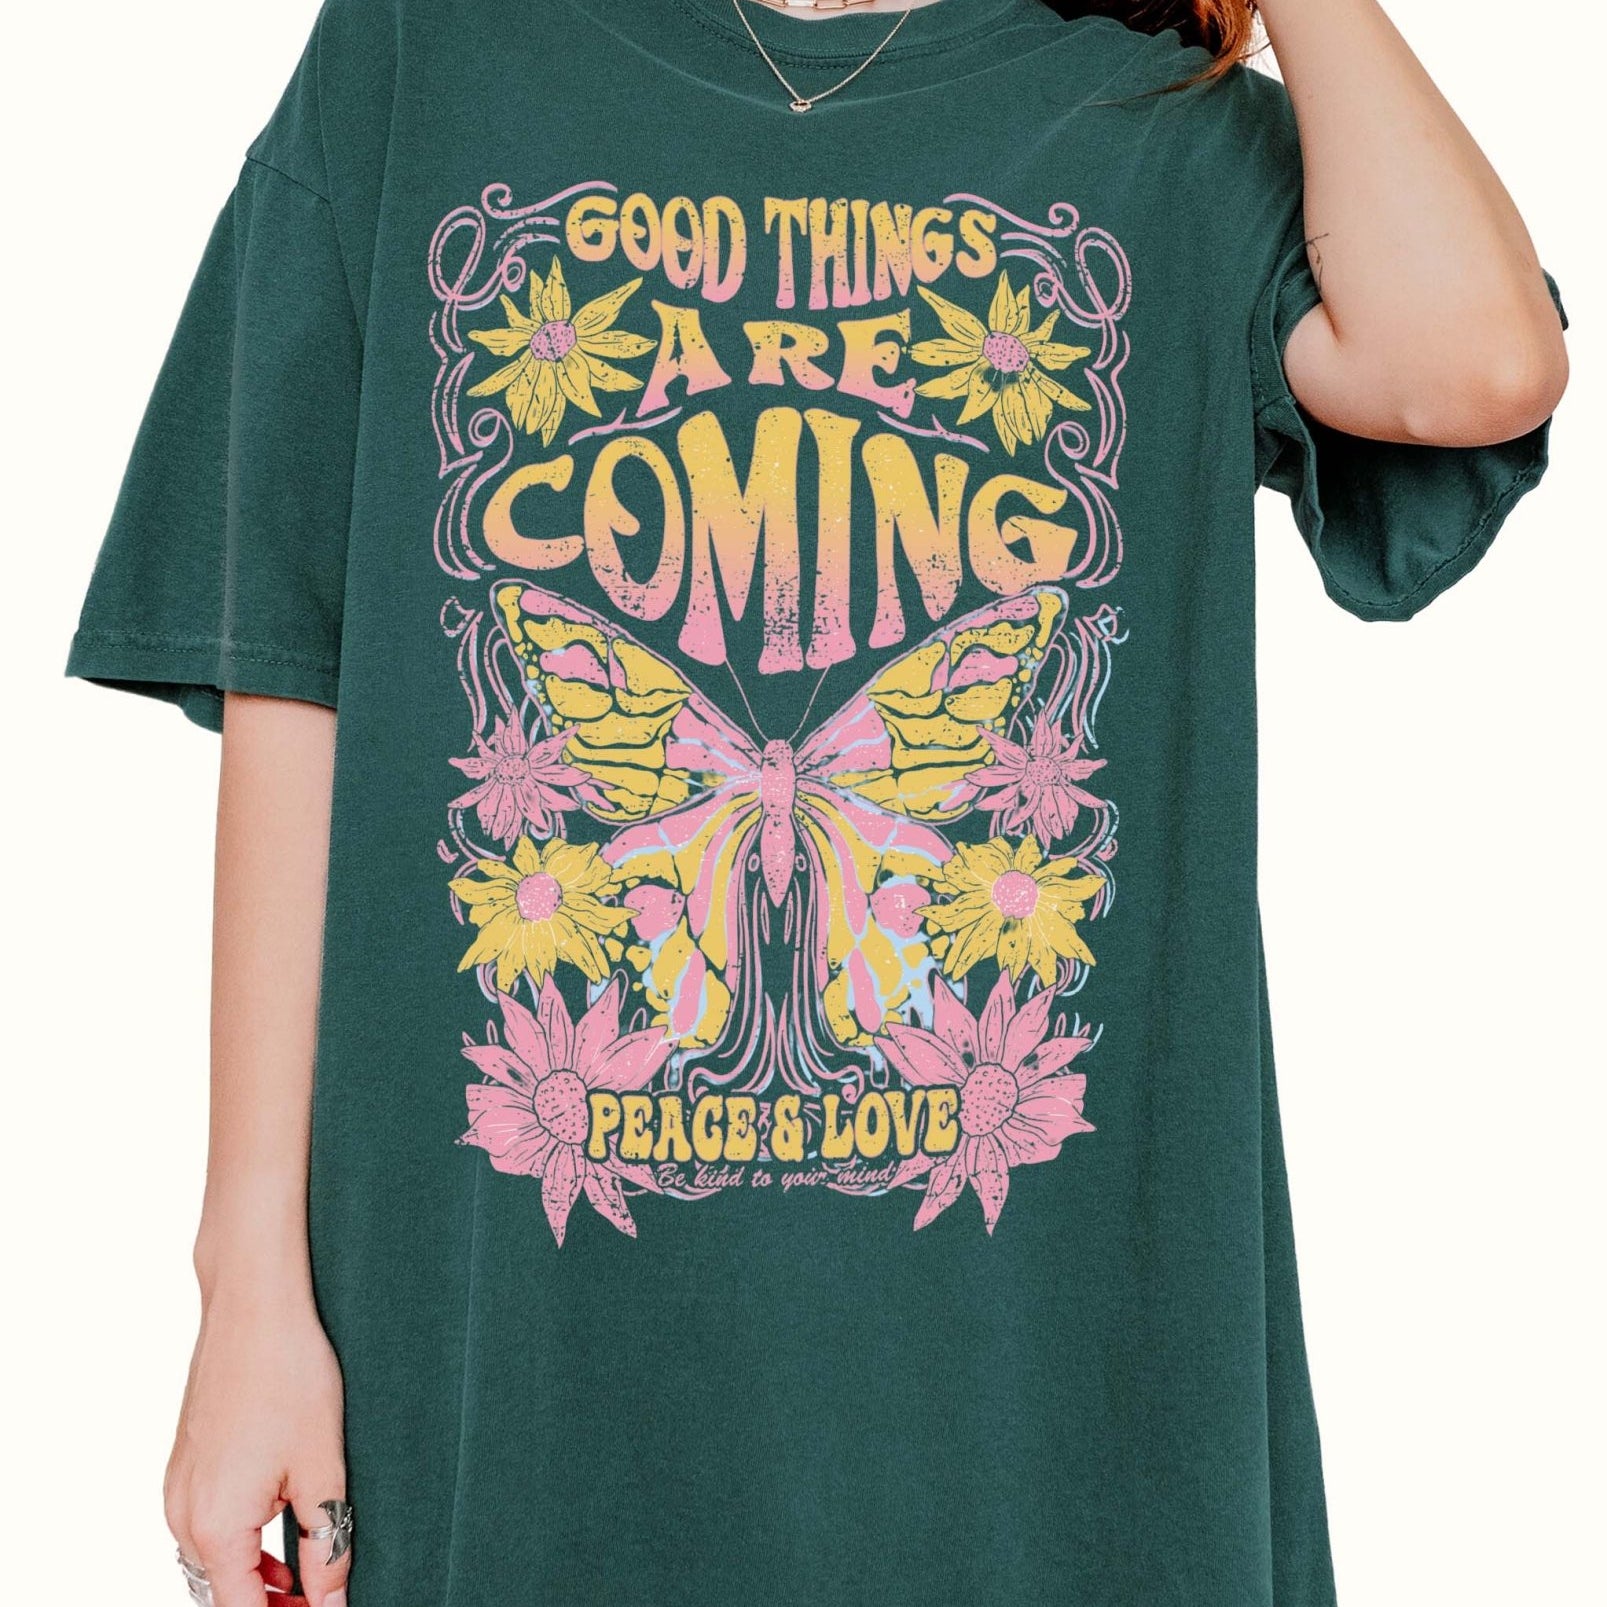 Good Things Are Coming Tee - UntamedEgo LLC.